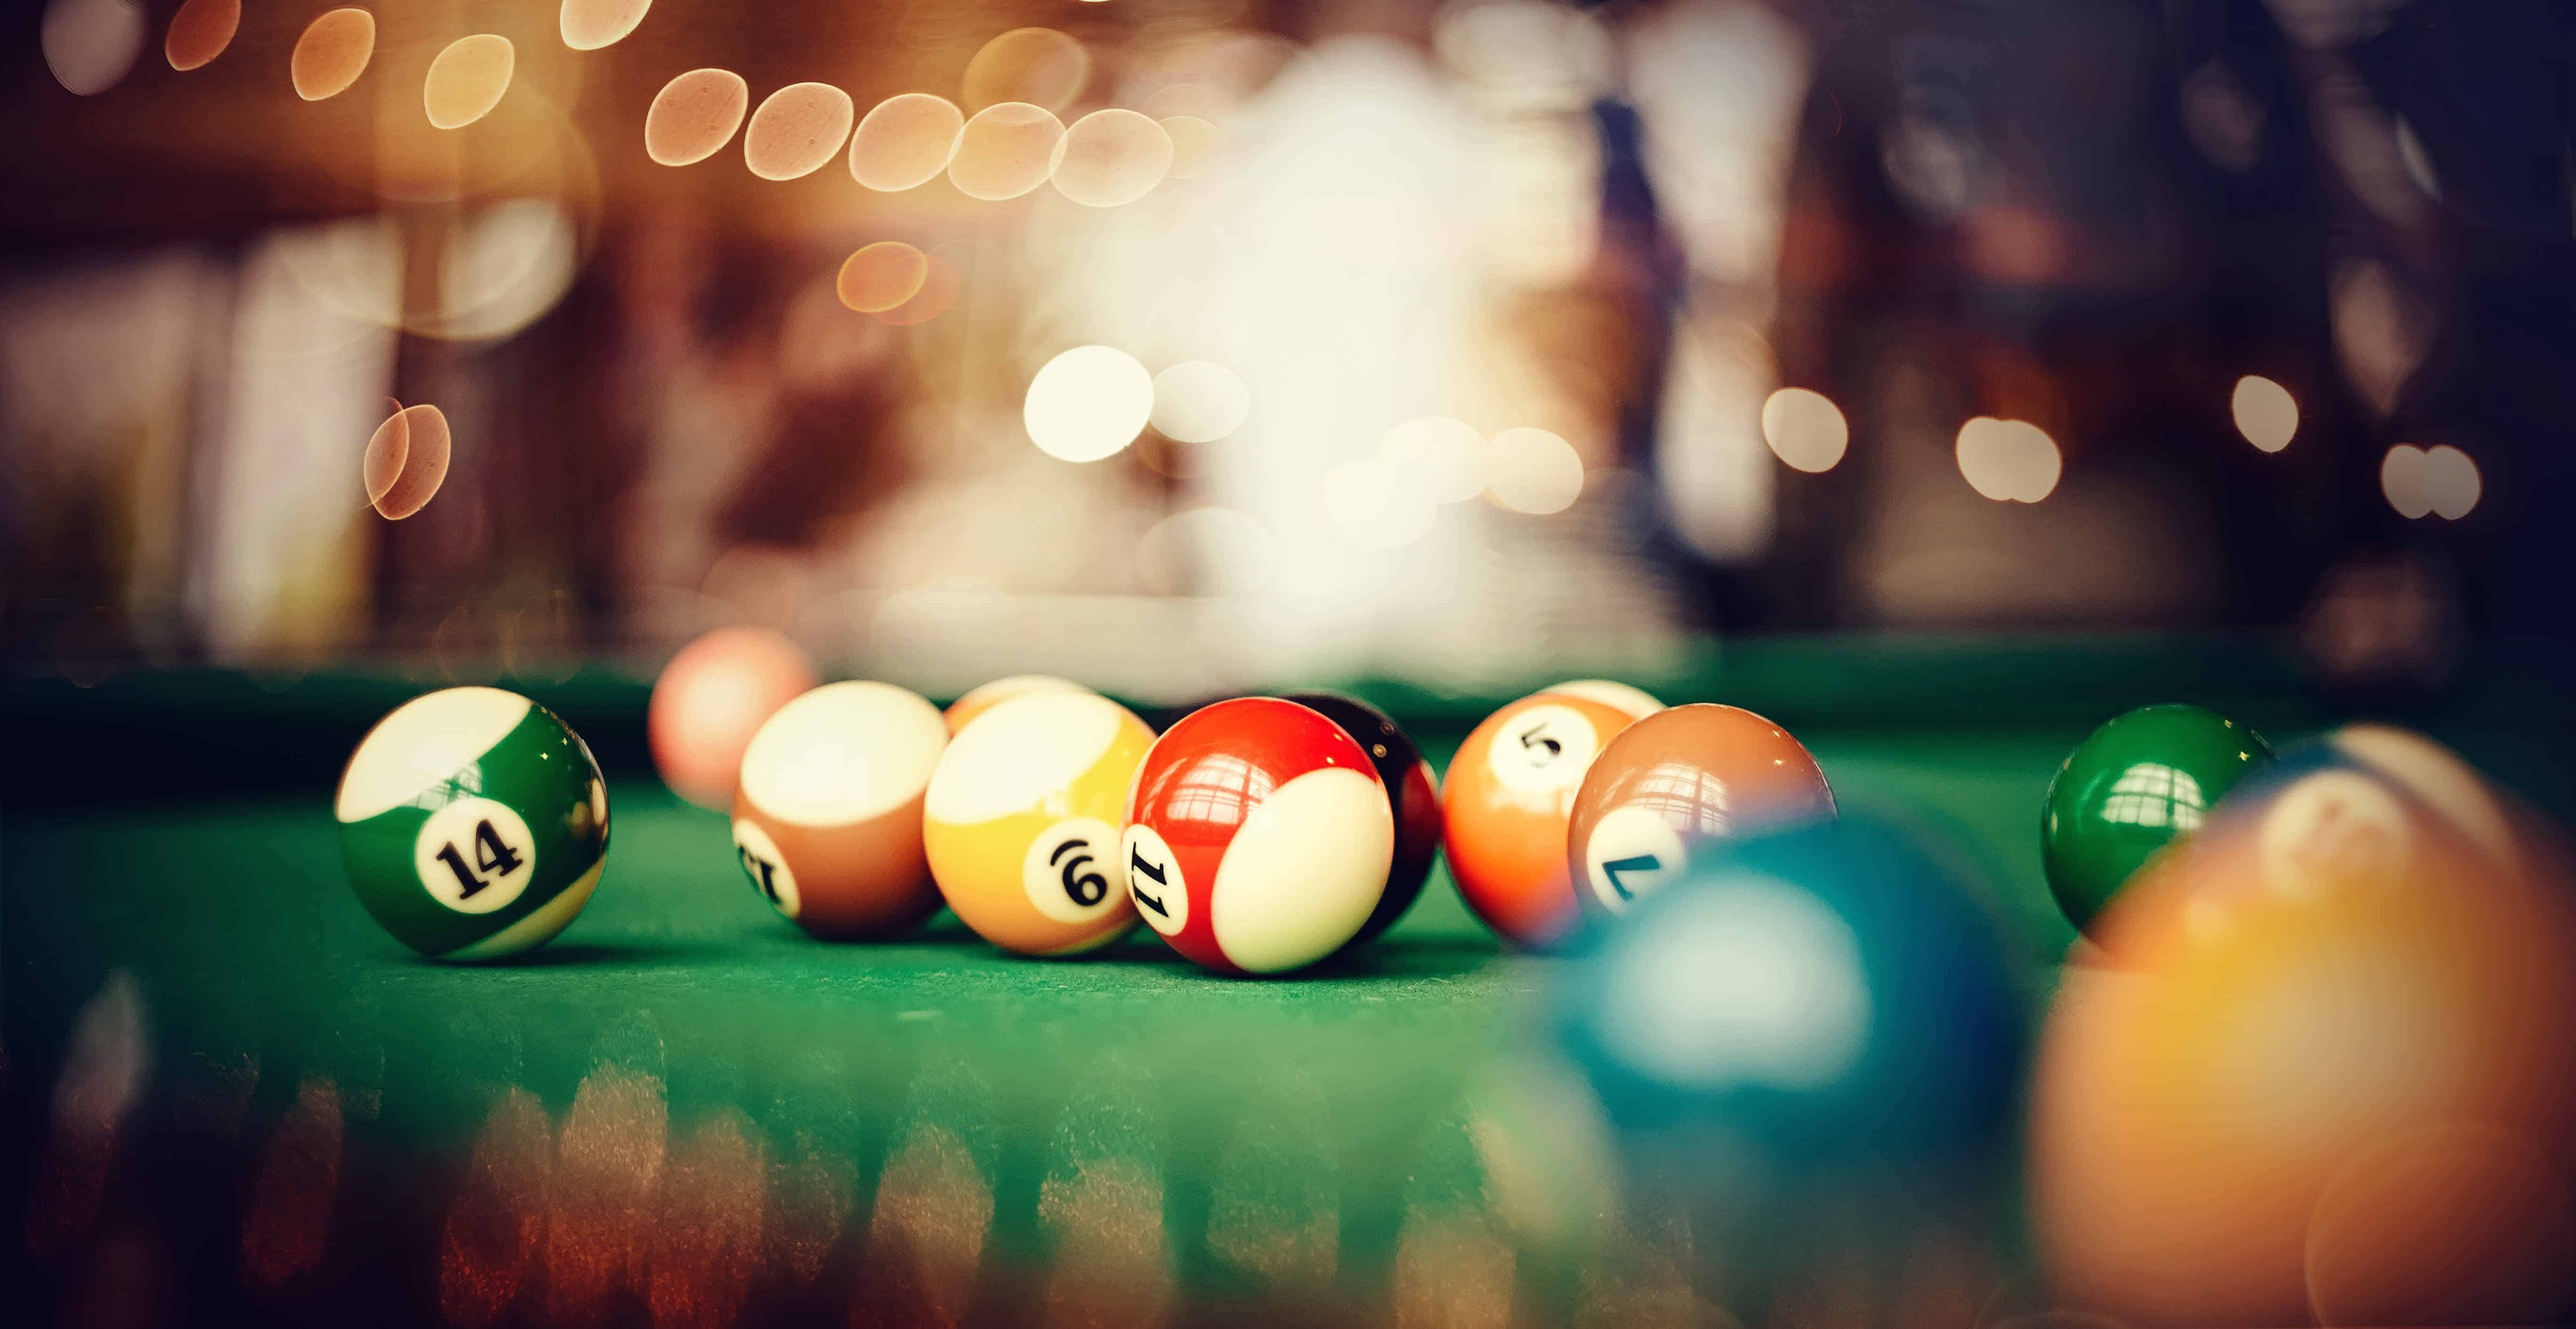 Procedures for issuing certificates of eligibility for doing the sports business for billiards and snooker in Vietnam